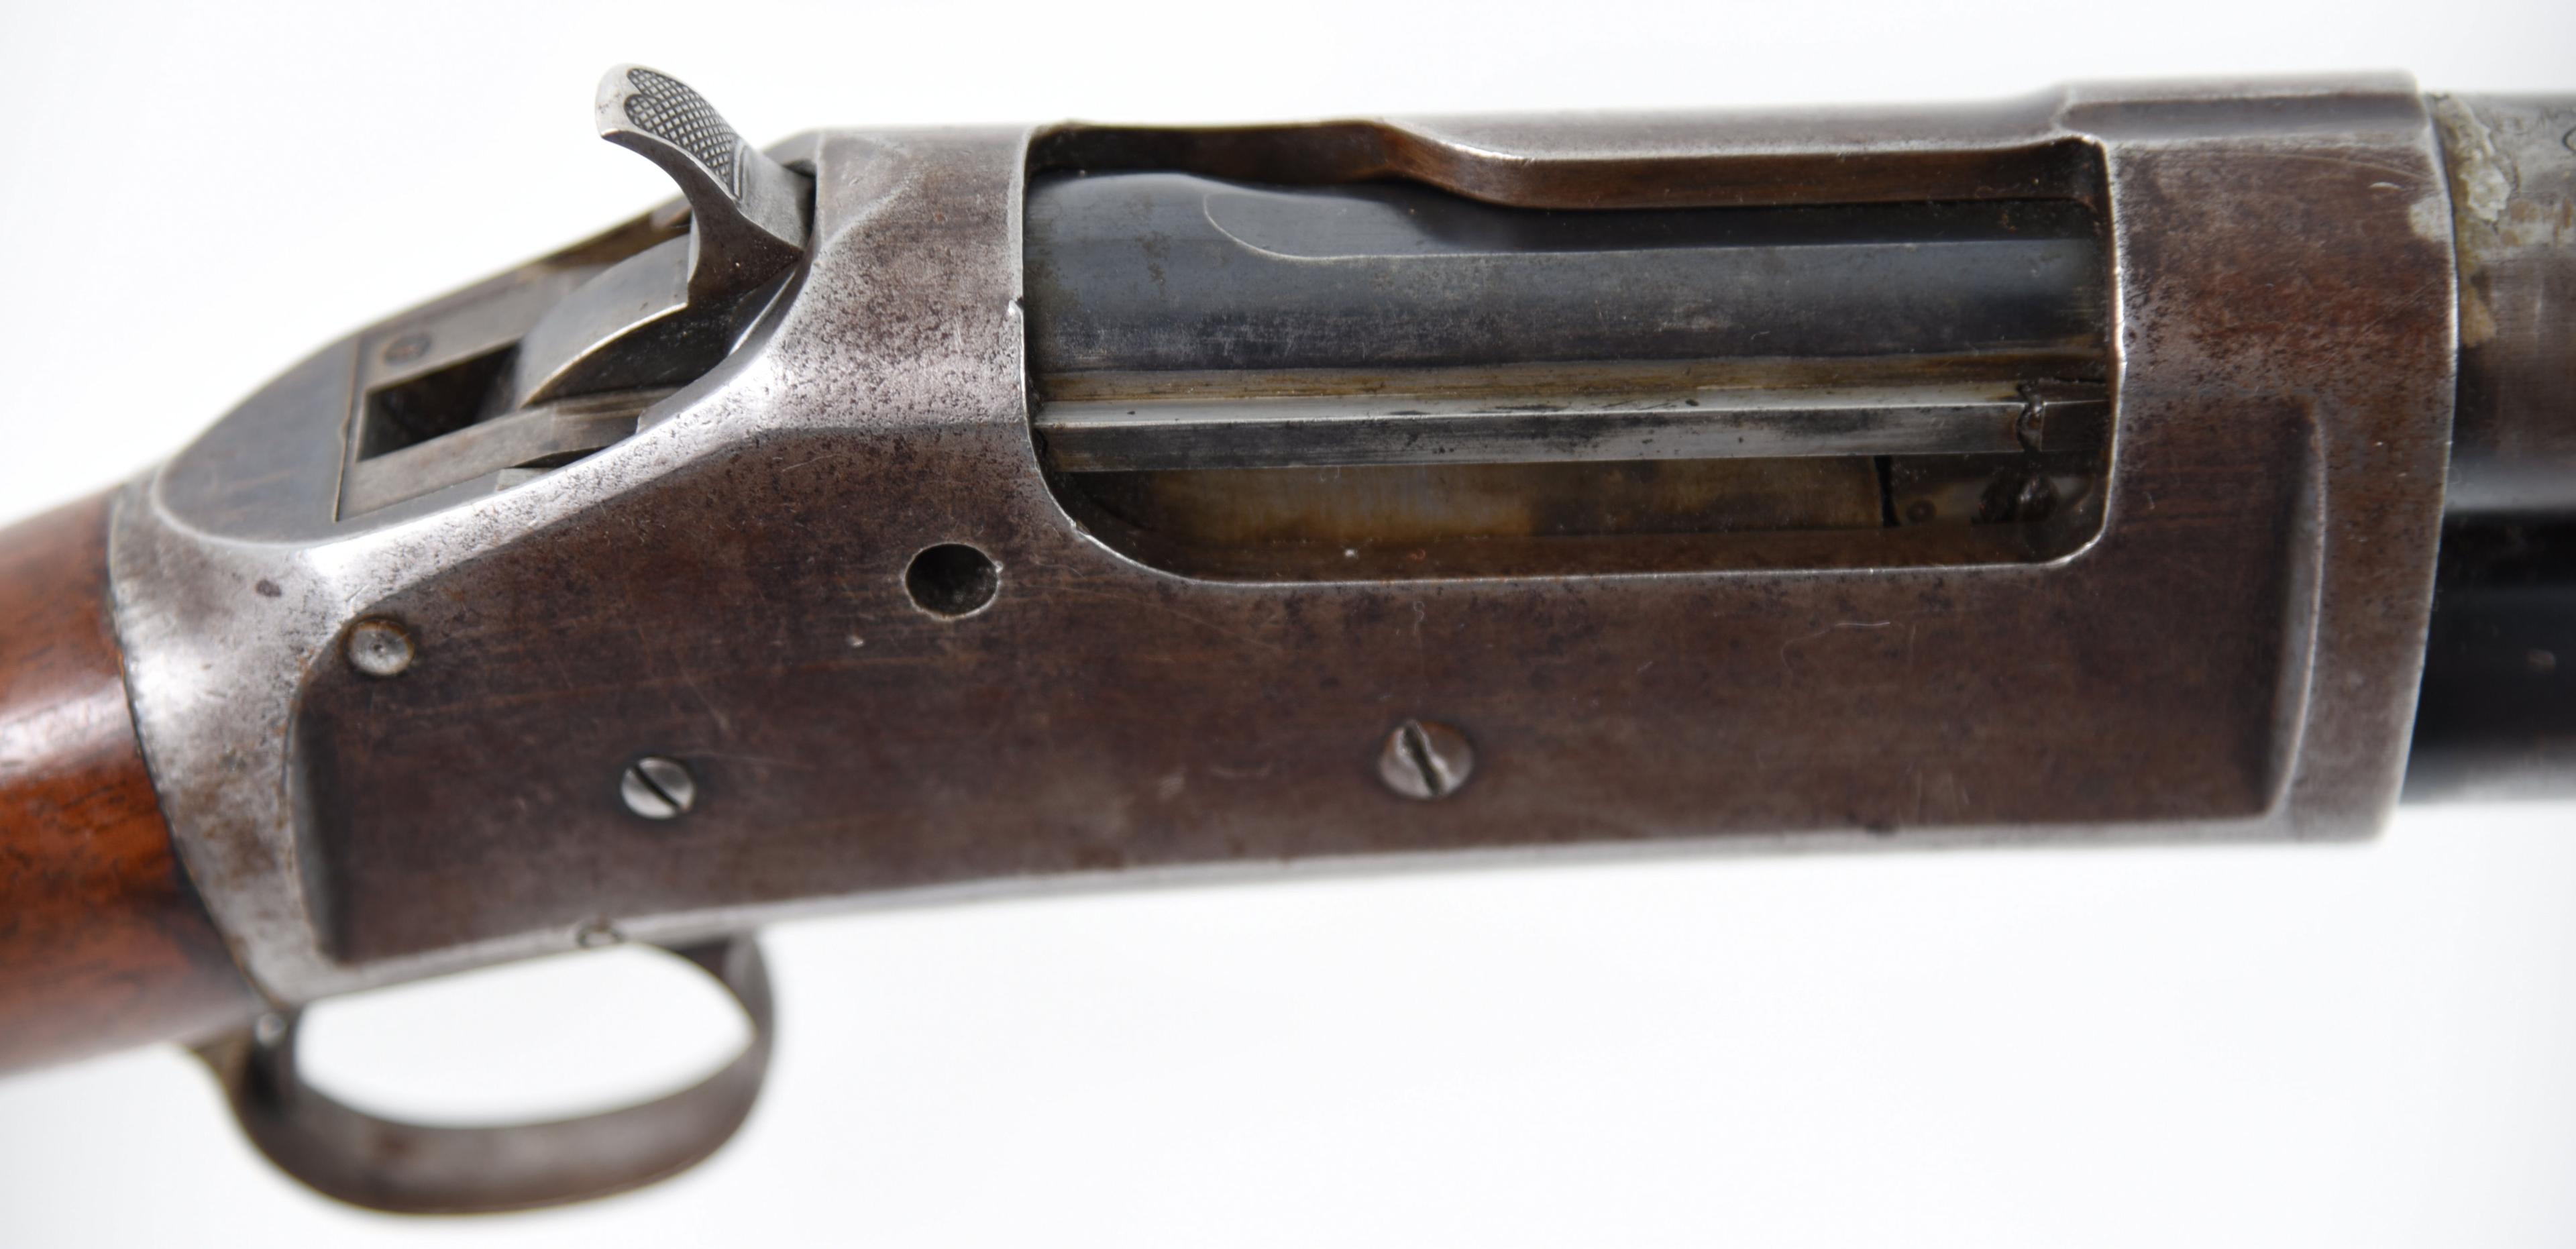 Winchester Repeating Arms Co 1893 Pump Action Shotgun